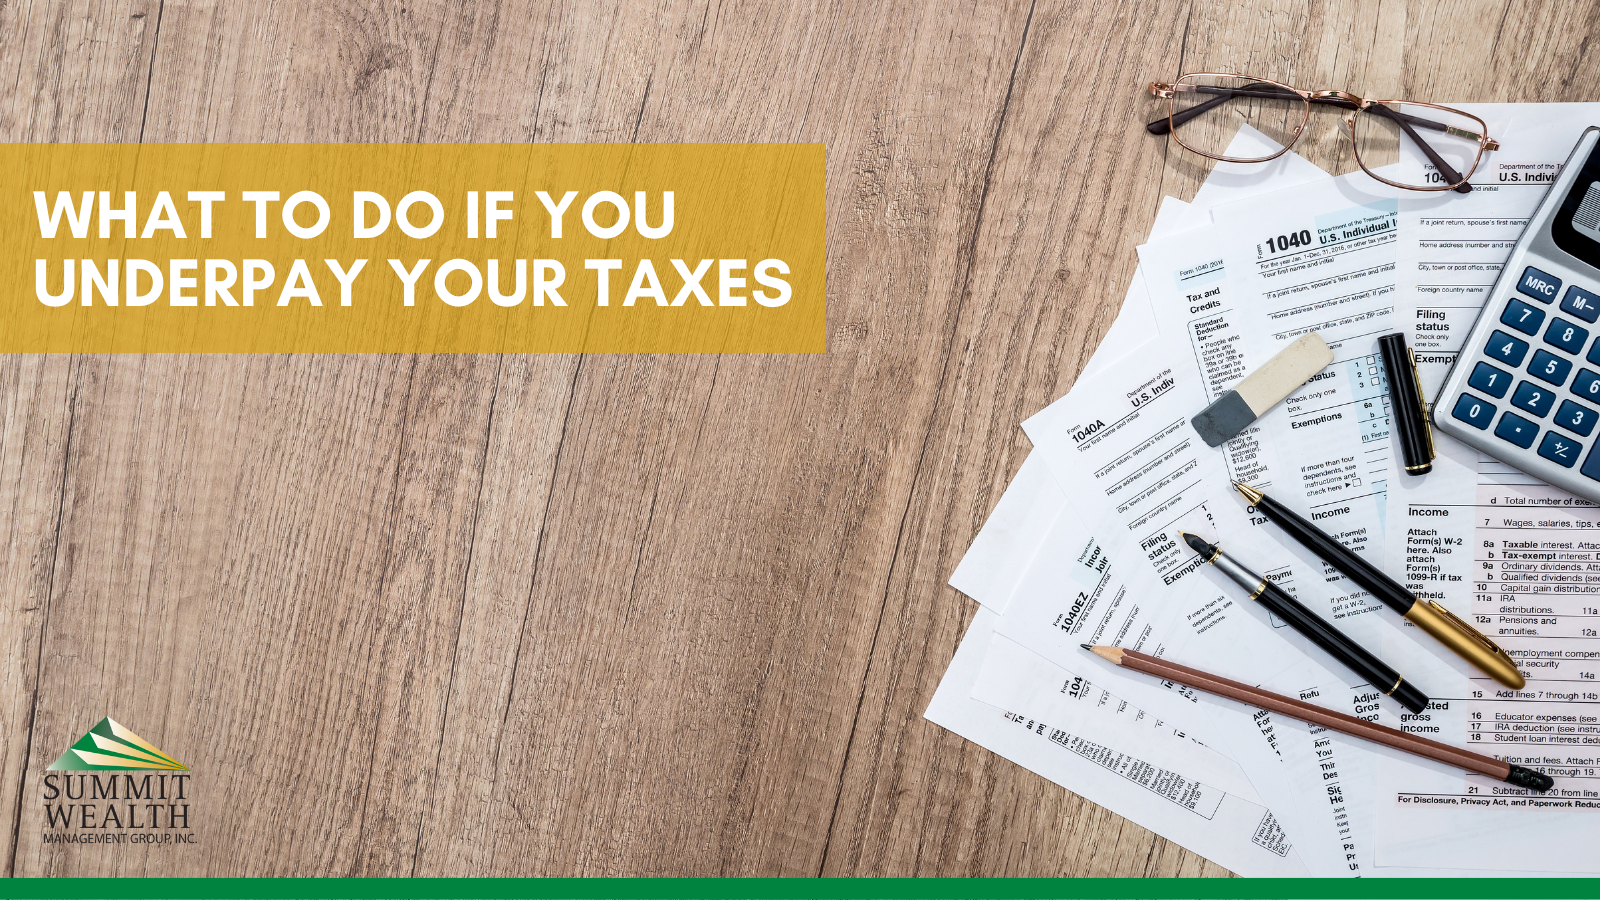 What to Do if You Underpay Your Taxes